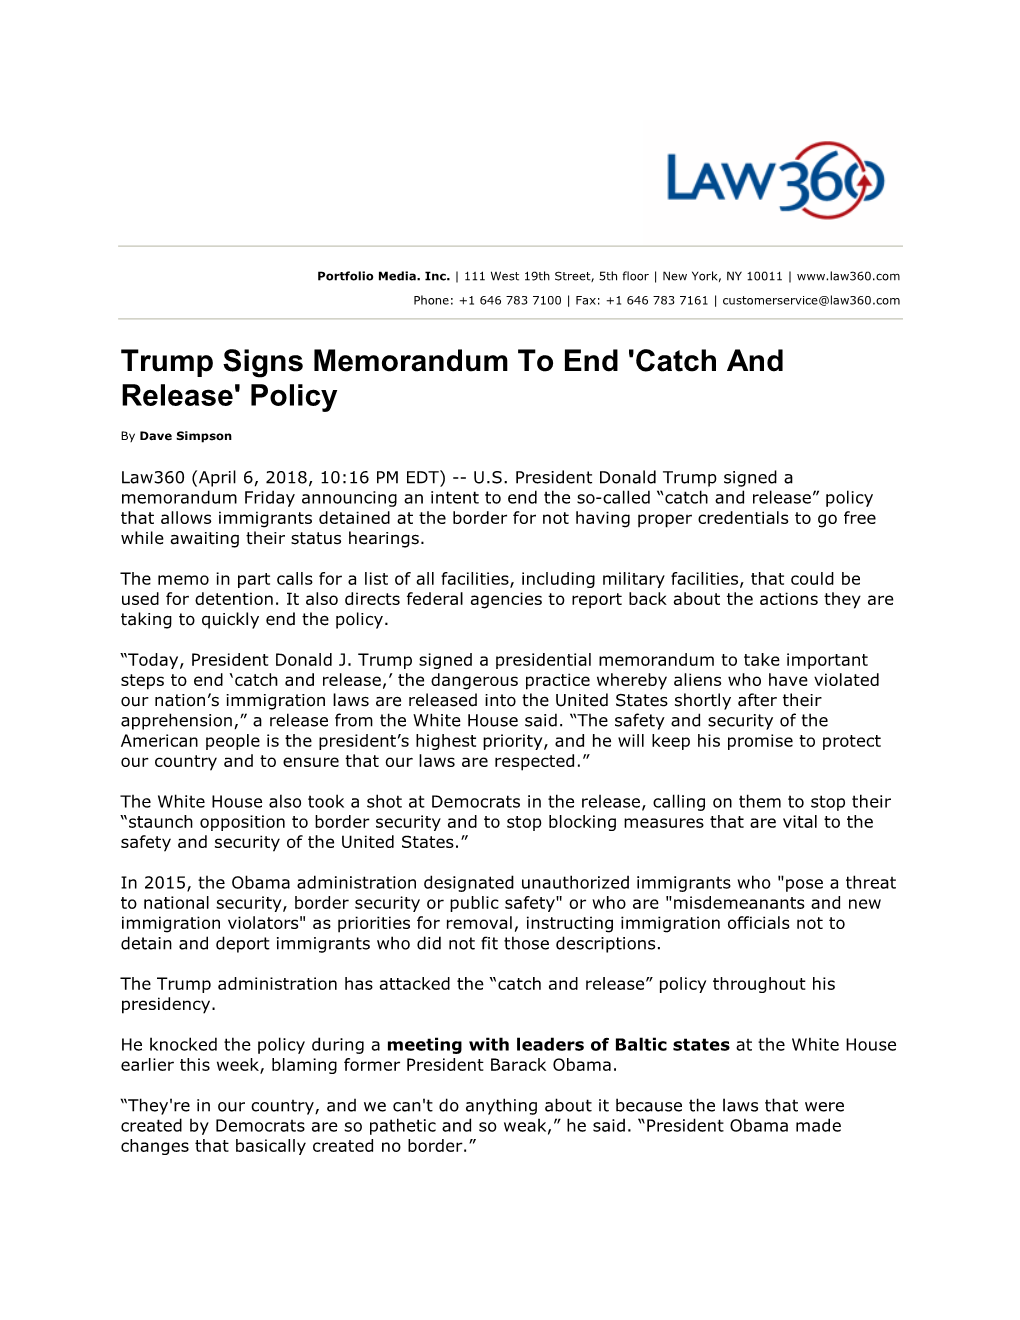 Trump Signs Memorandum to End 'Catch and Release' Policy